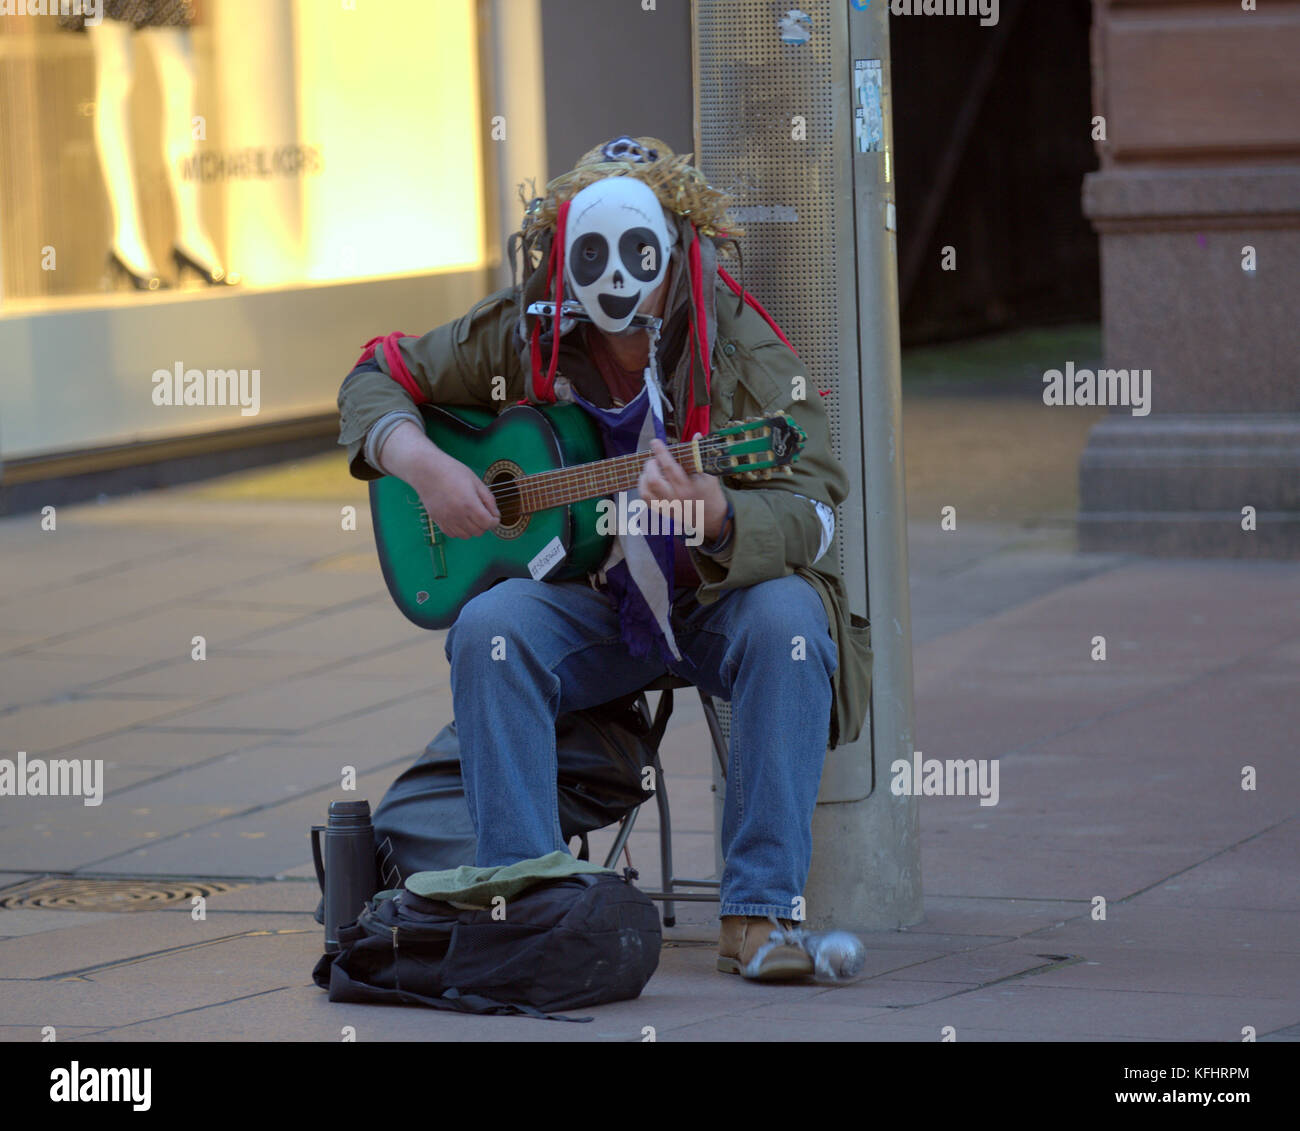 Glasgow, Scotland, UK. 29th October. Busker with green guitar and mask. Halloween on the streets of the city present some everyday sights differently. Credit Gerard Ferry/Alamy news Stock Photo